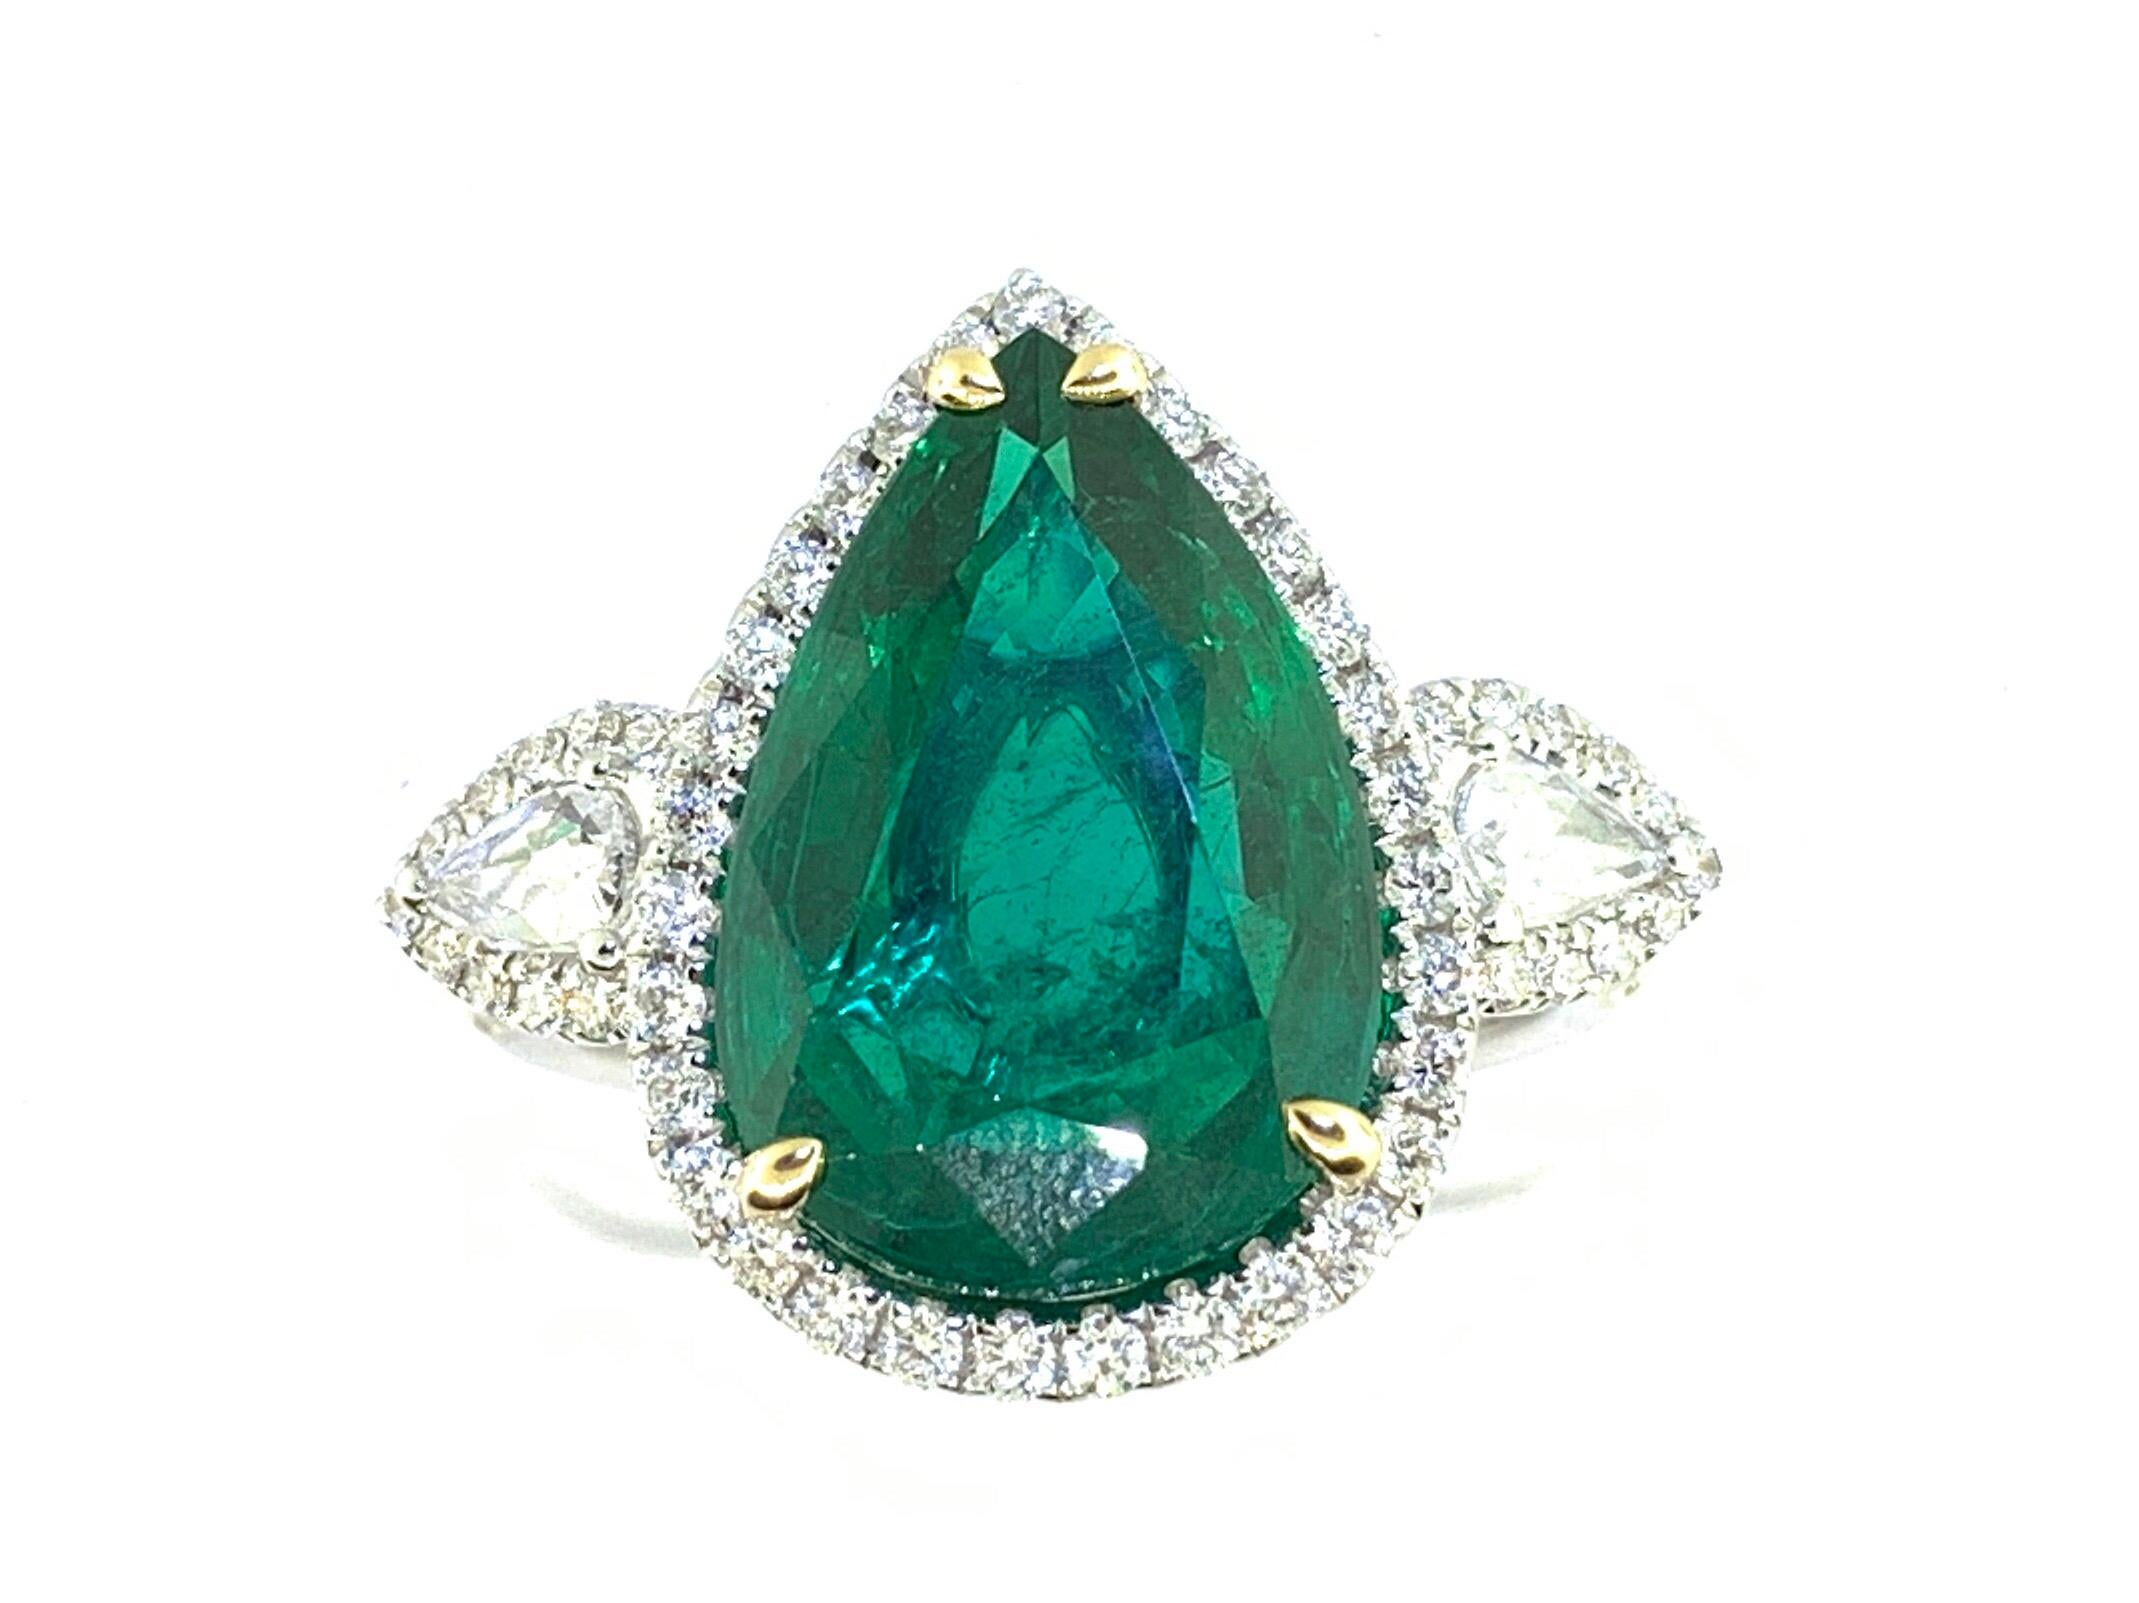 This stunning cocktail ring showcases a beautiful GIA Certified 6.21 Pear Shape Emerald with a Diamond Halo. The Emerald is flanked by two Rose Cut Diamonds, and is set in 18k white gold, with 18k yellow gold prongs on the Emerald. Total diamond